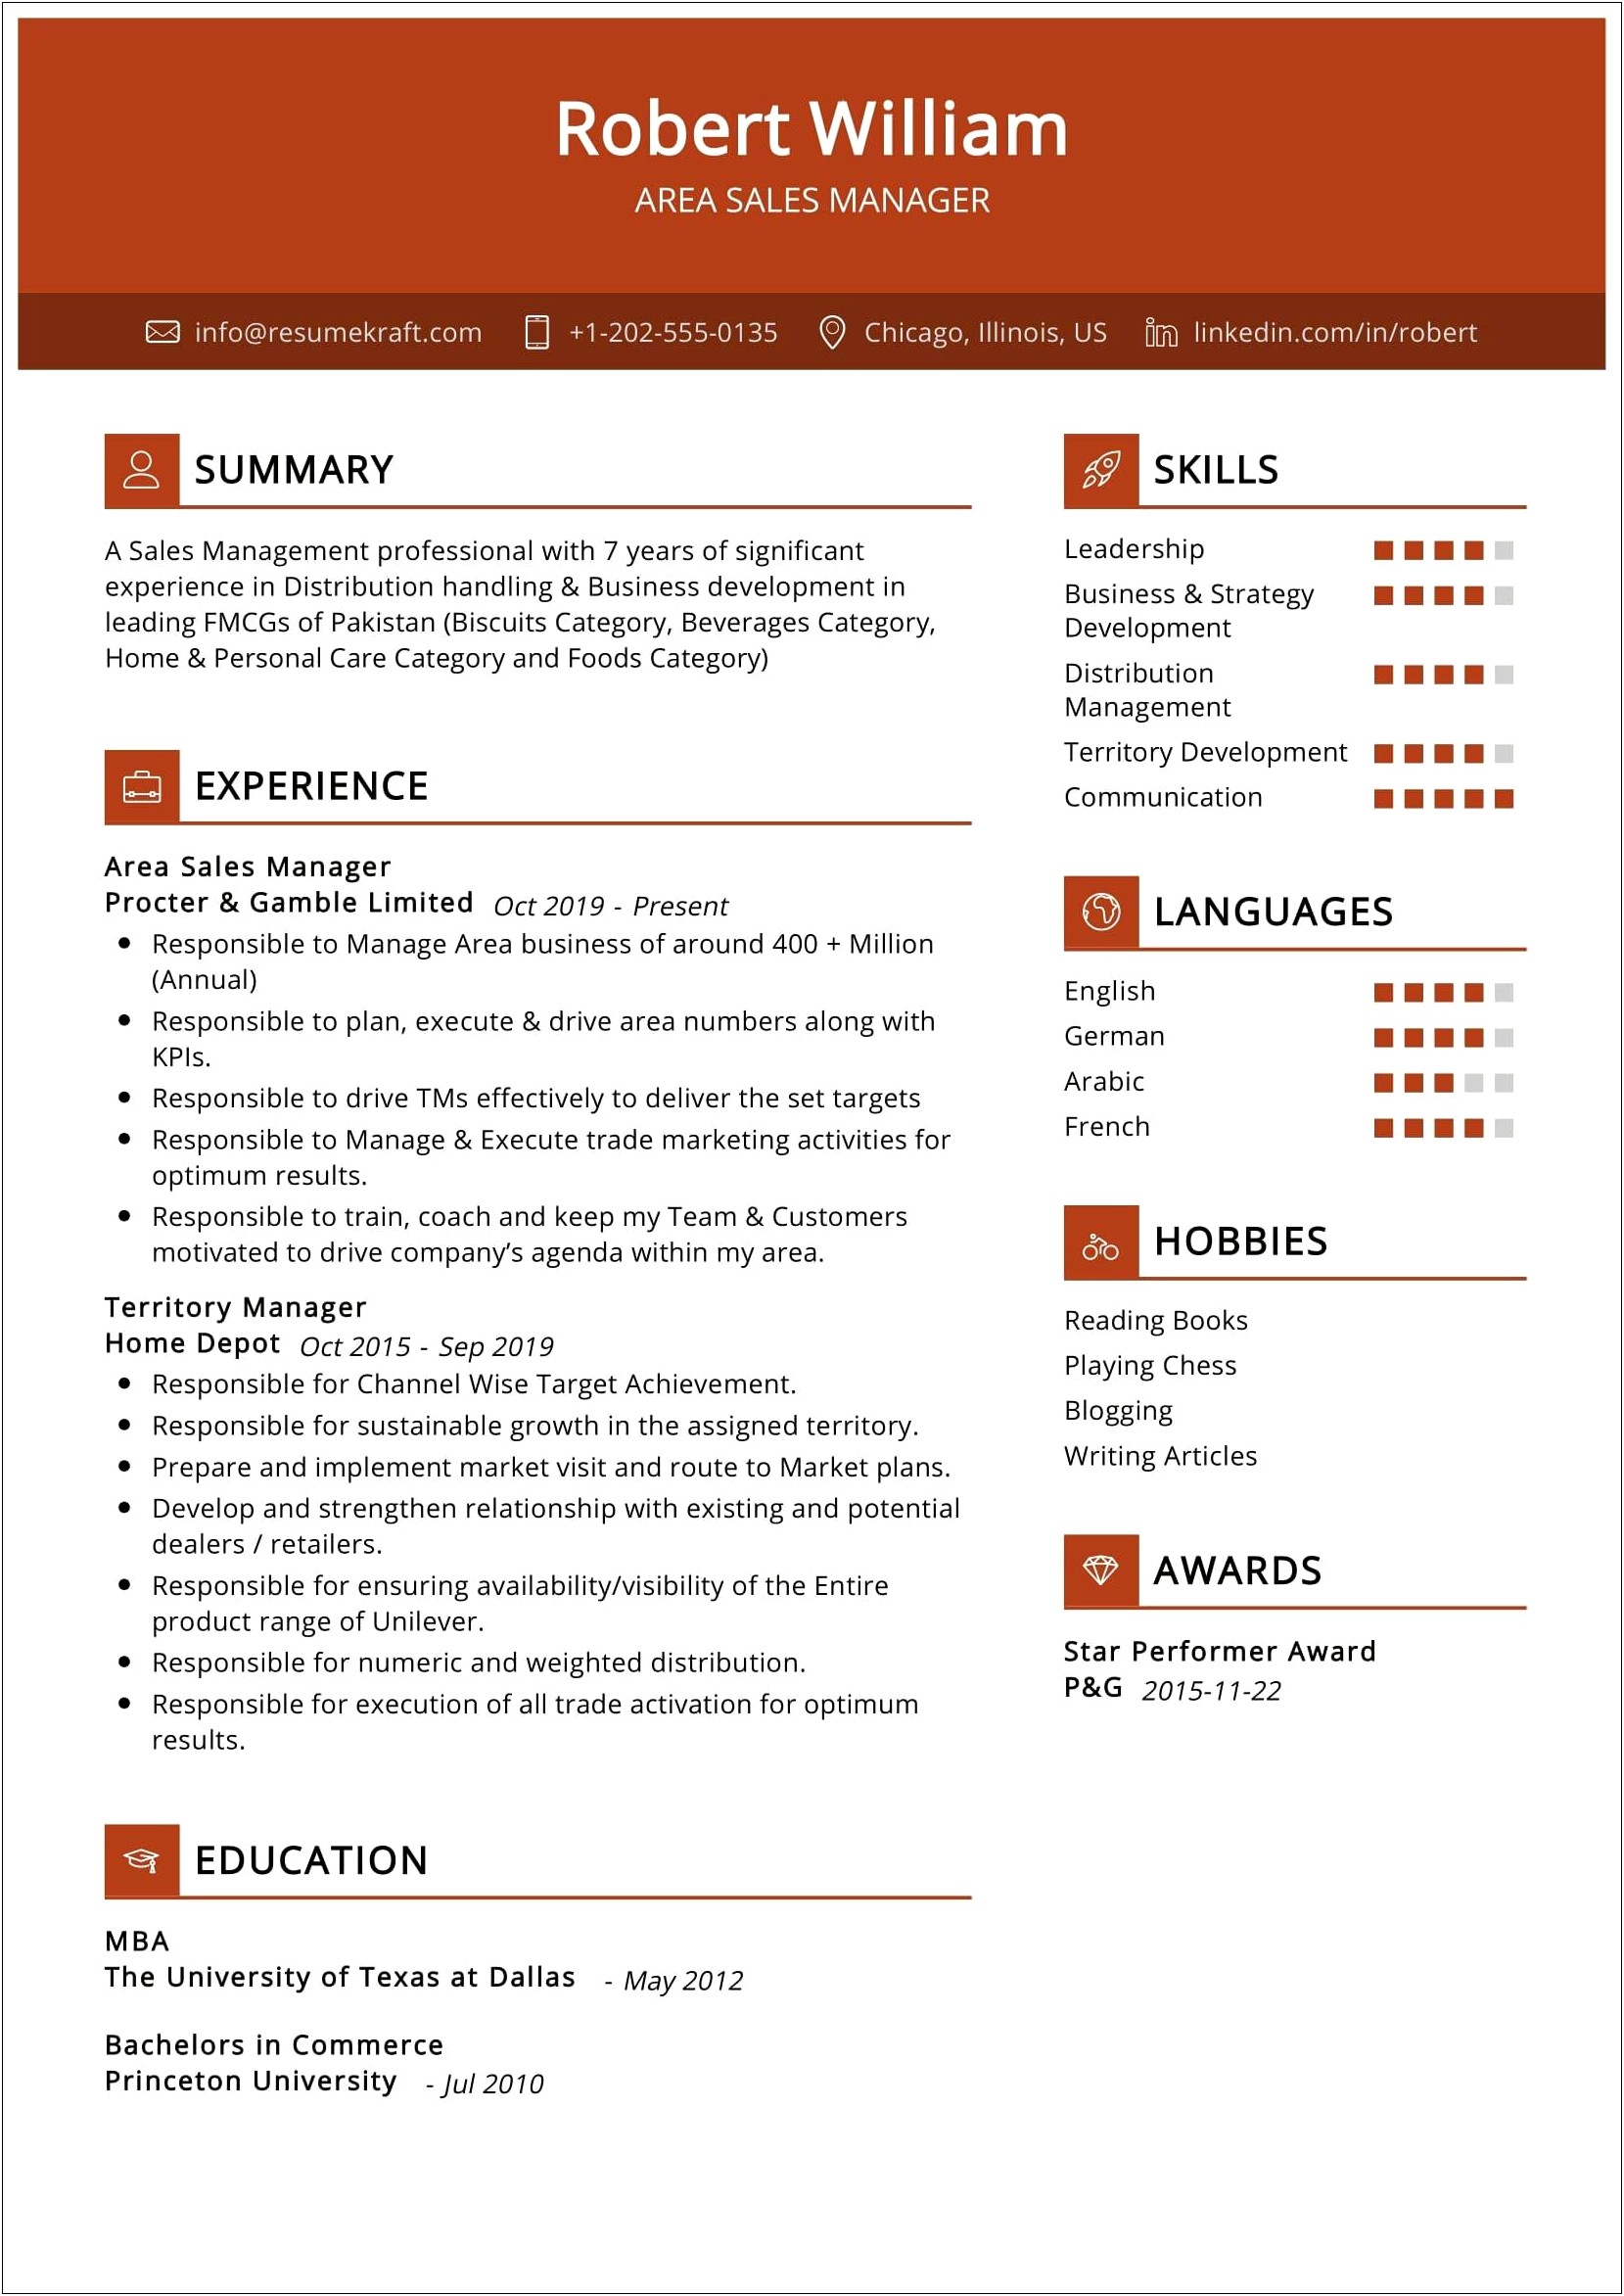 Resume Objective For Business To Business Sales